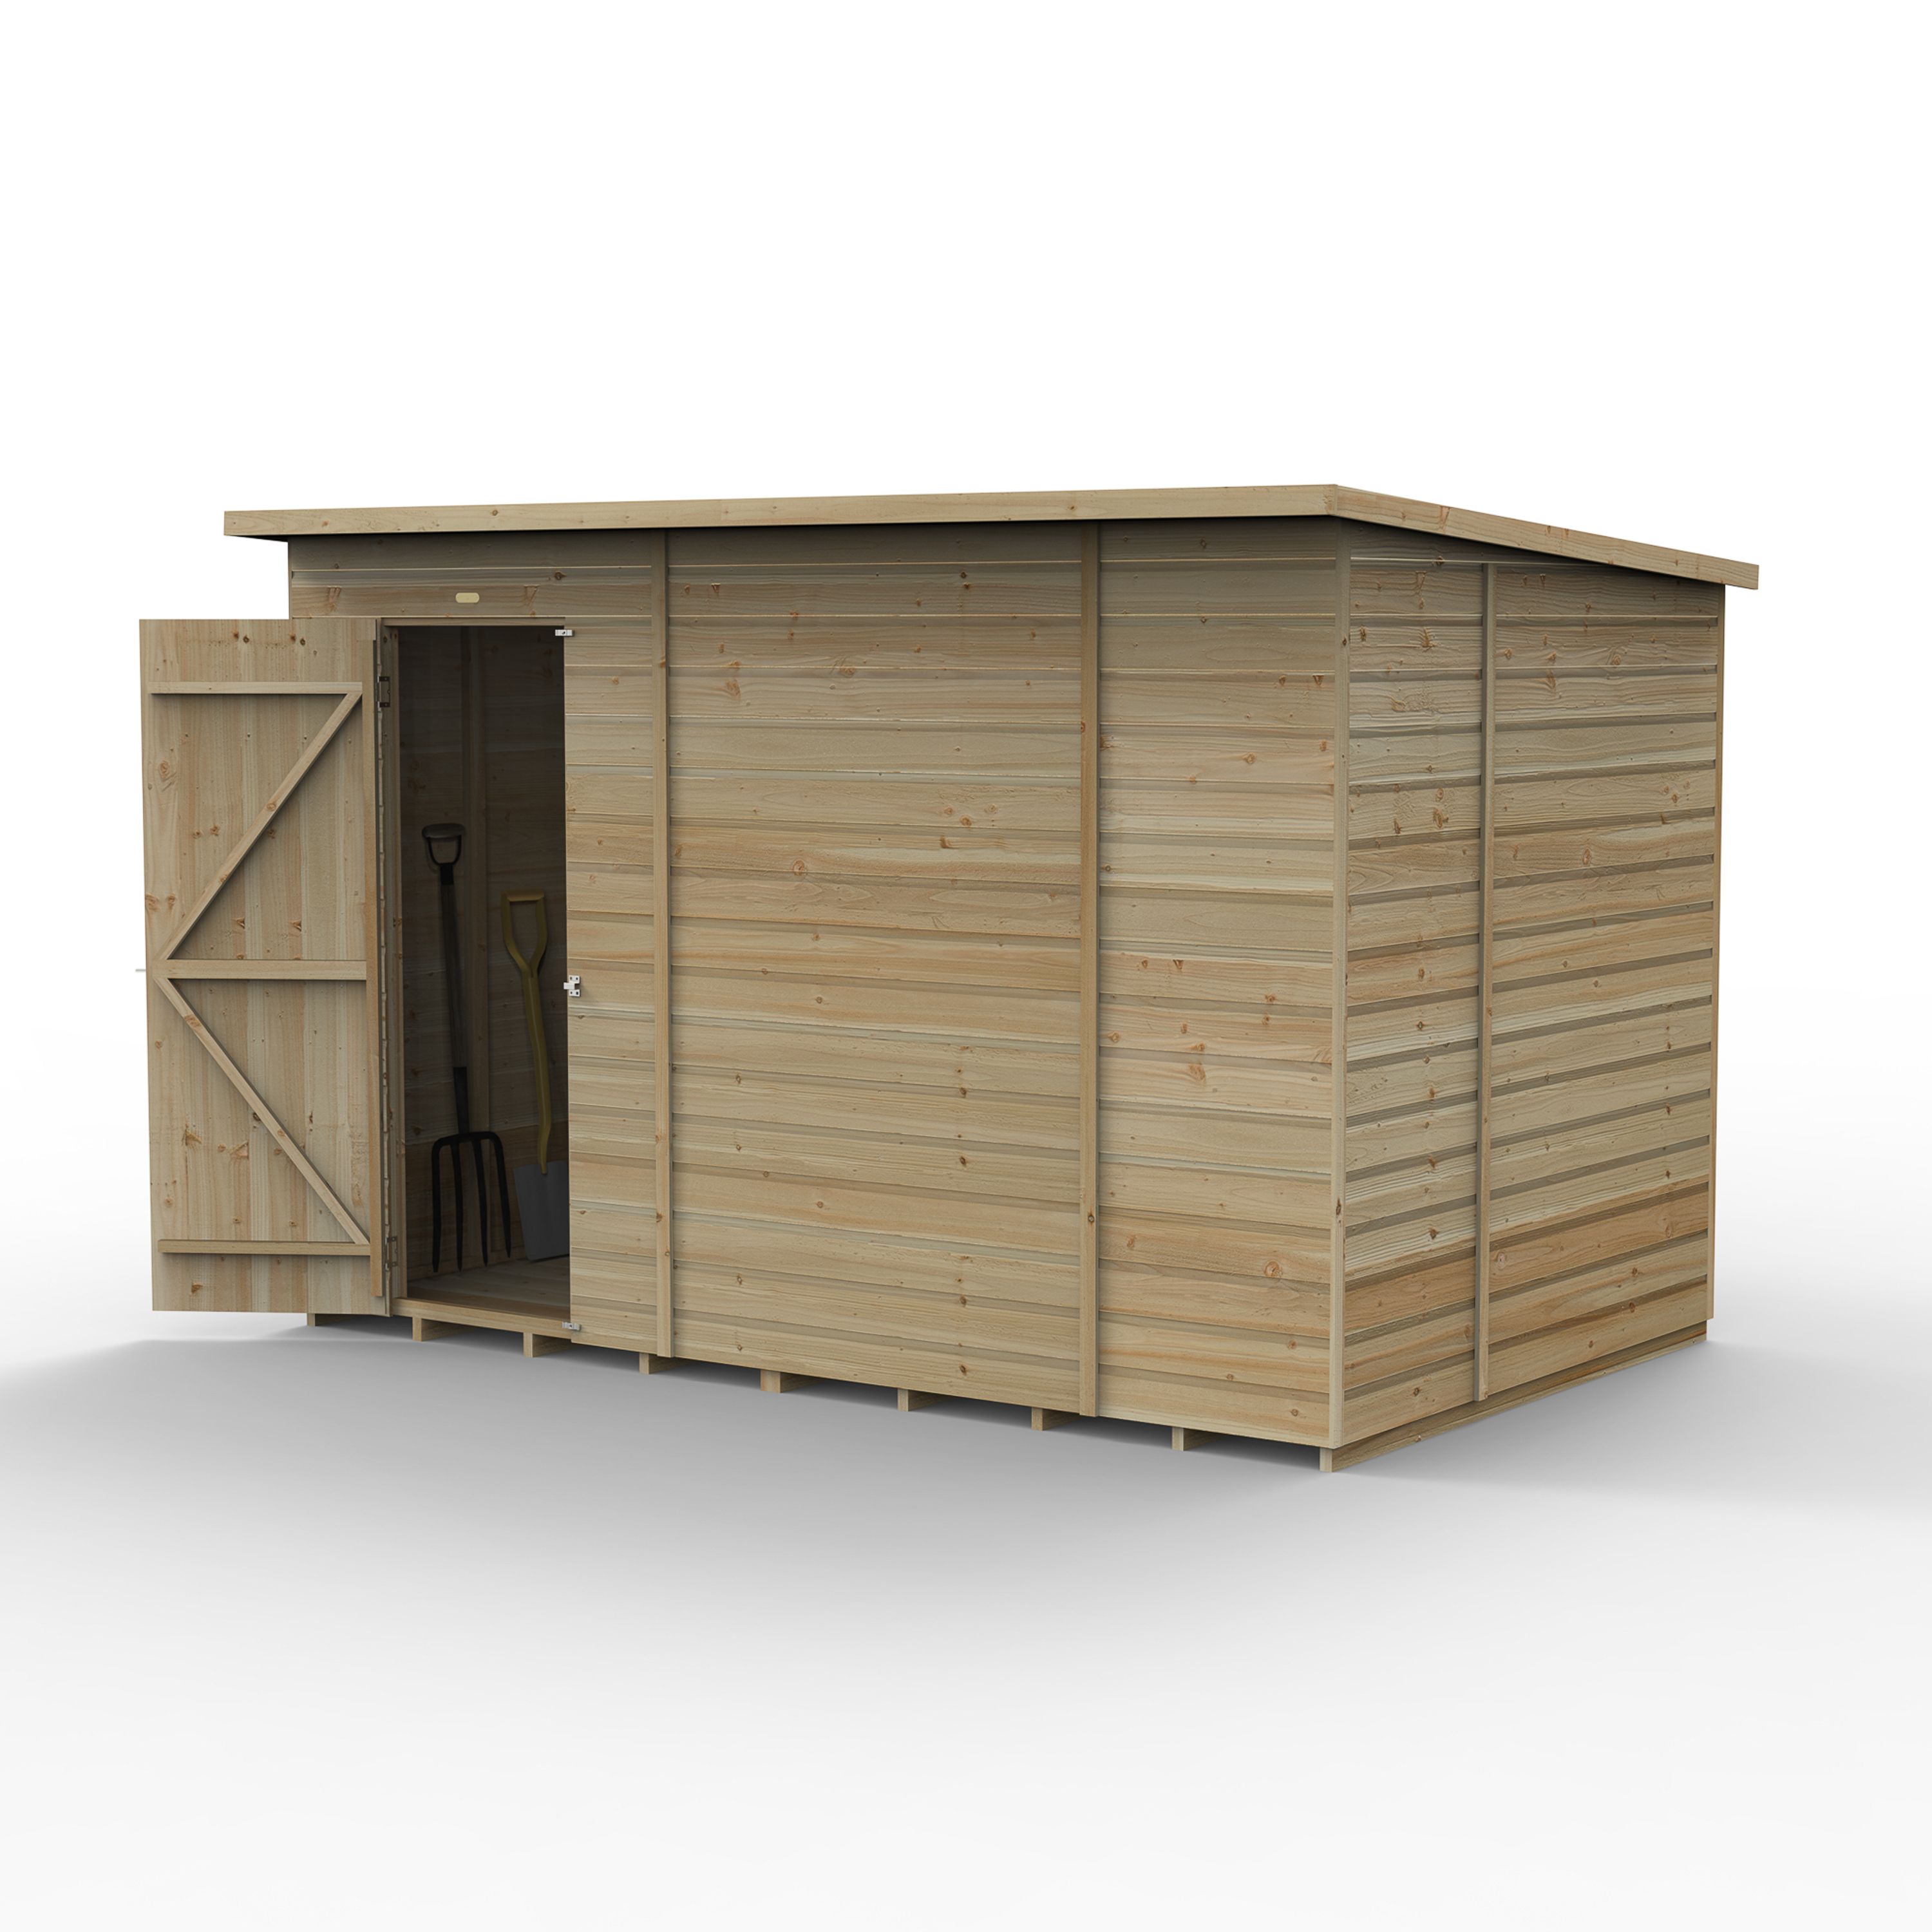 Forest Garden Beckwood 10x6 ft Pent Natural timber Wooden 2 door Shed with floor (Base included)